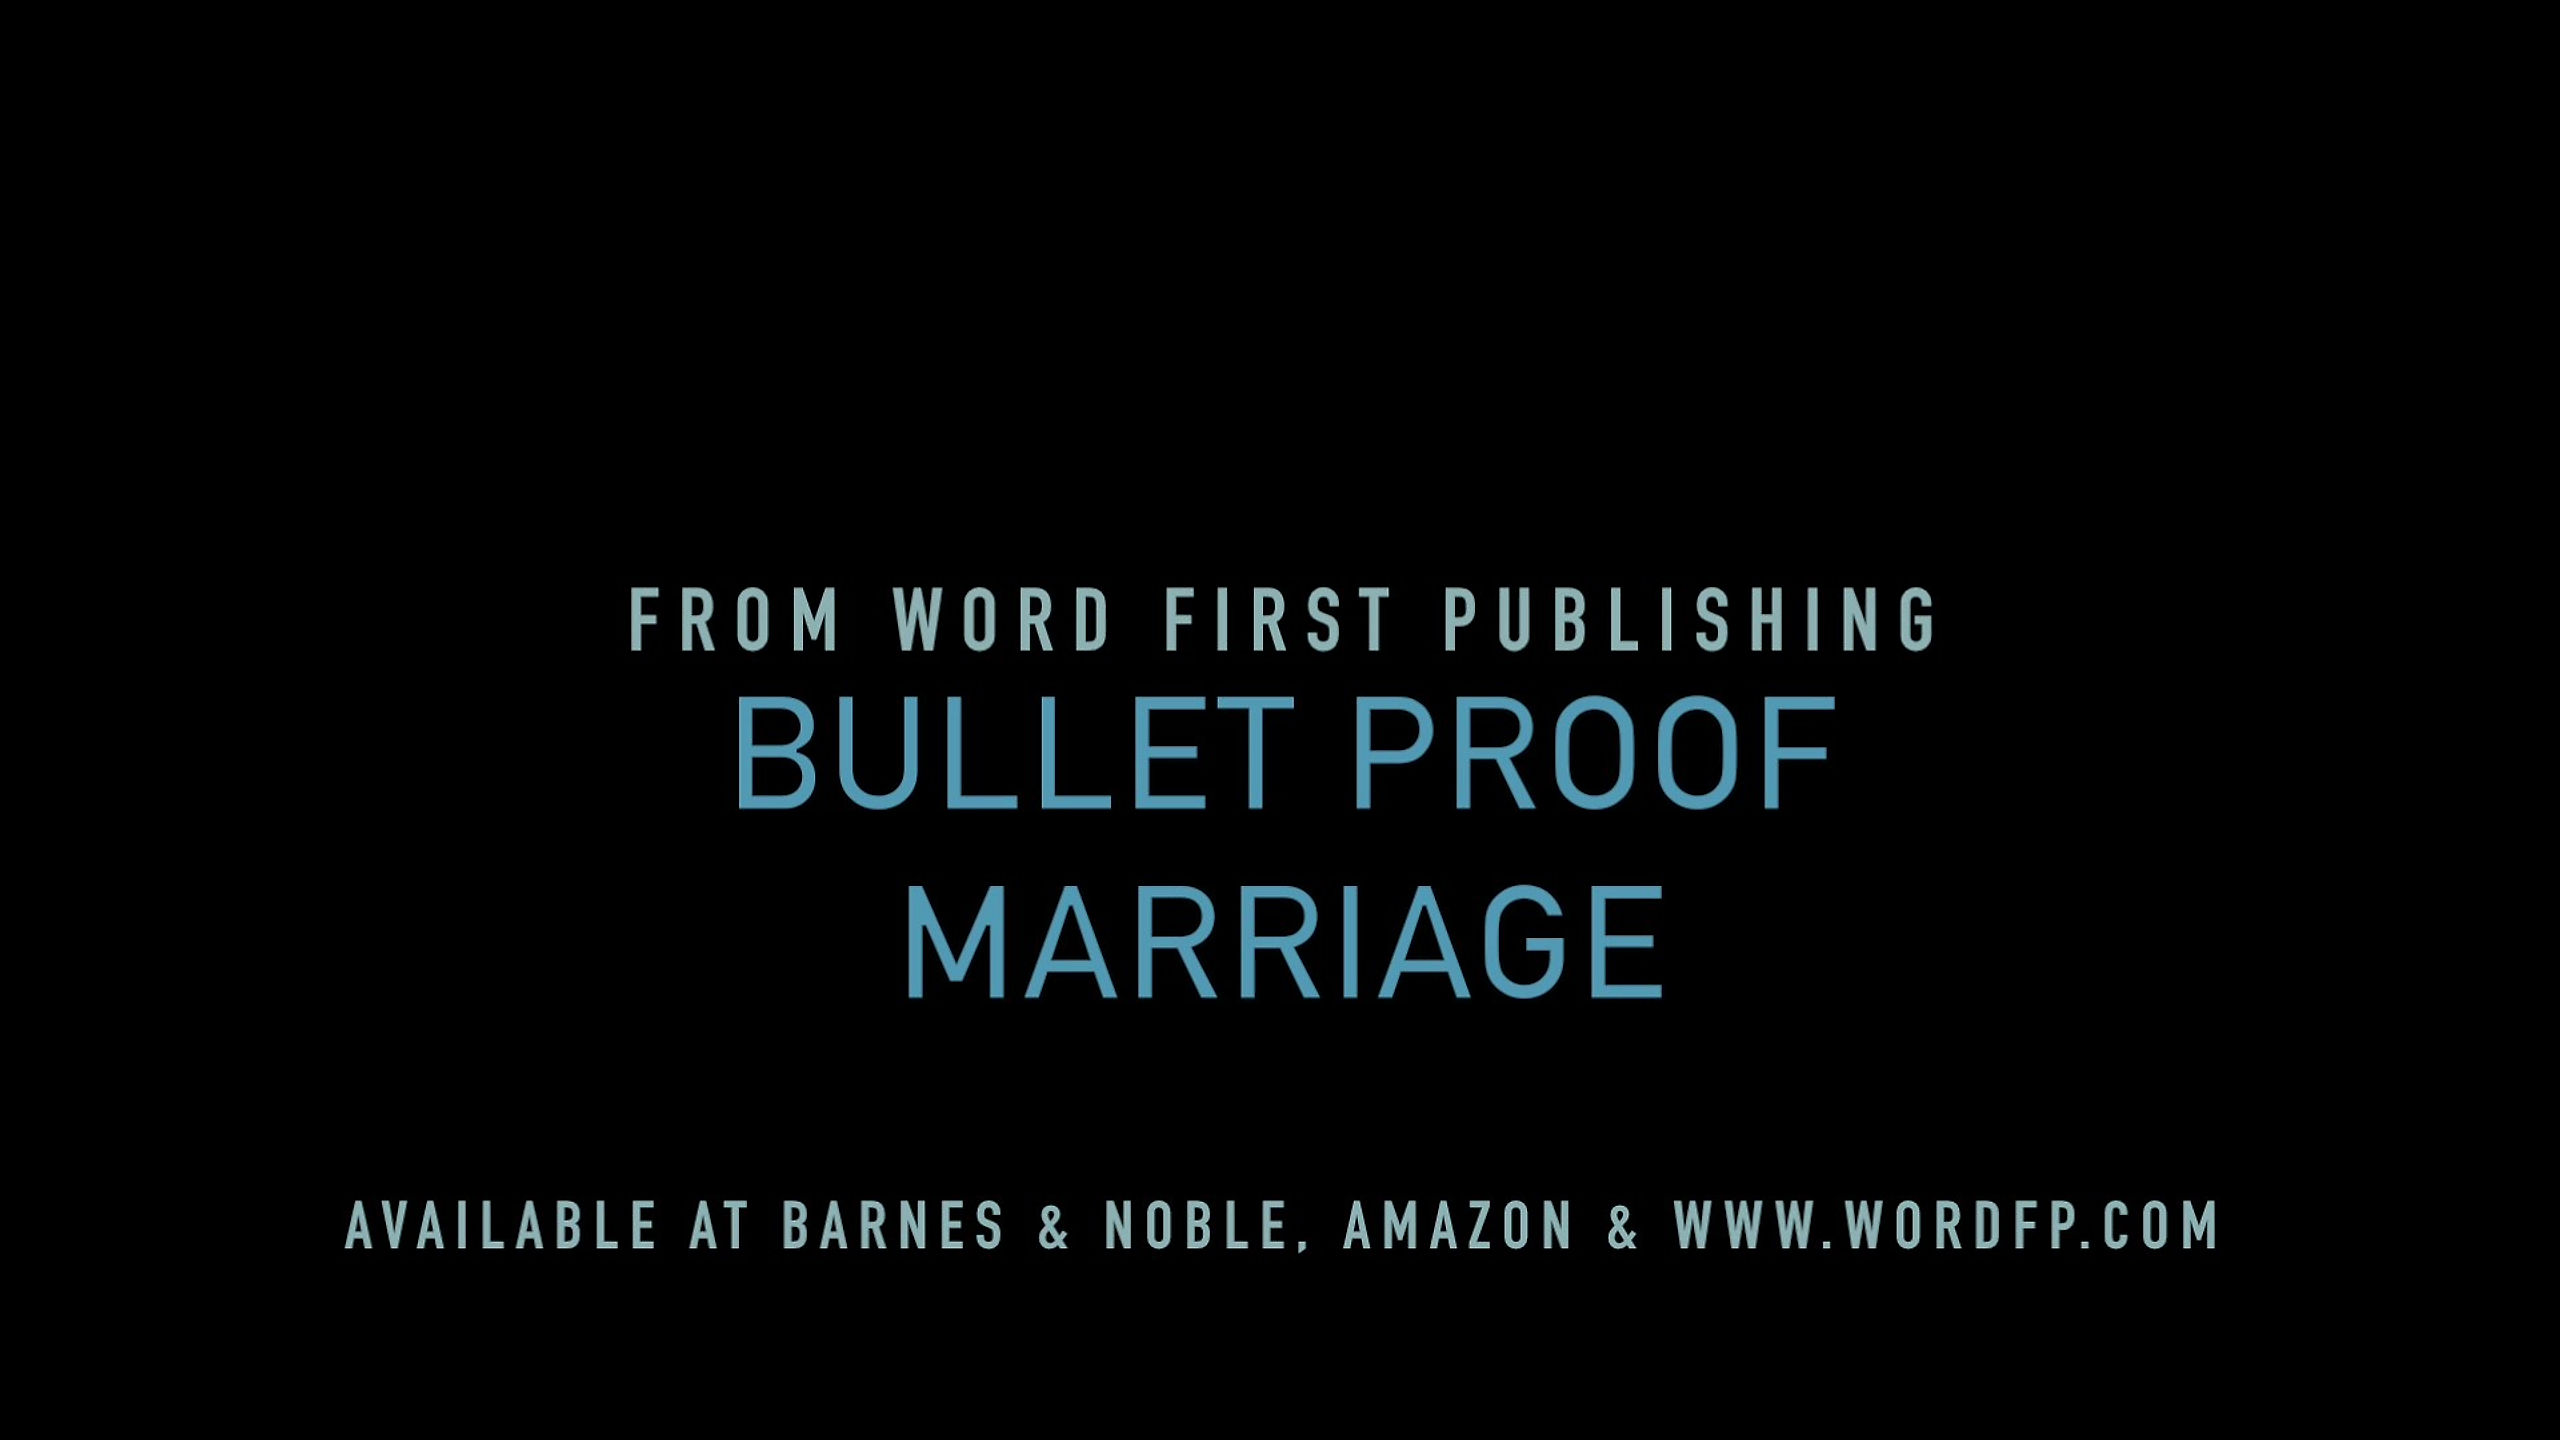 BULLET PROOF MARRIAGE